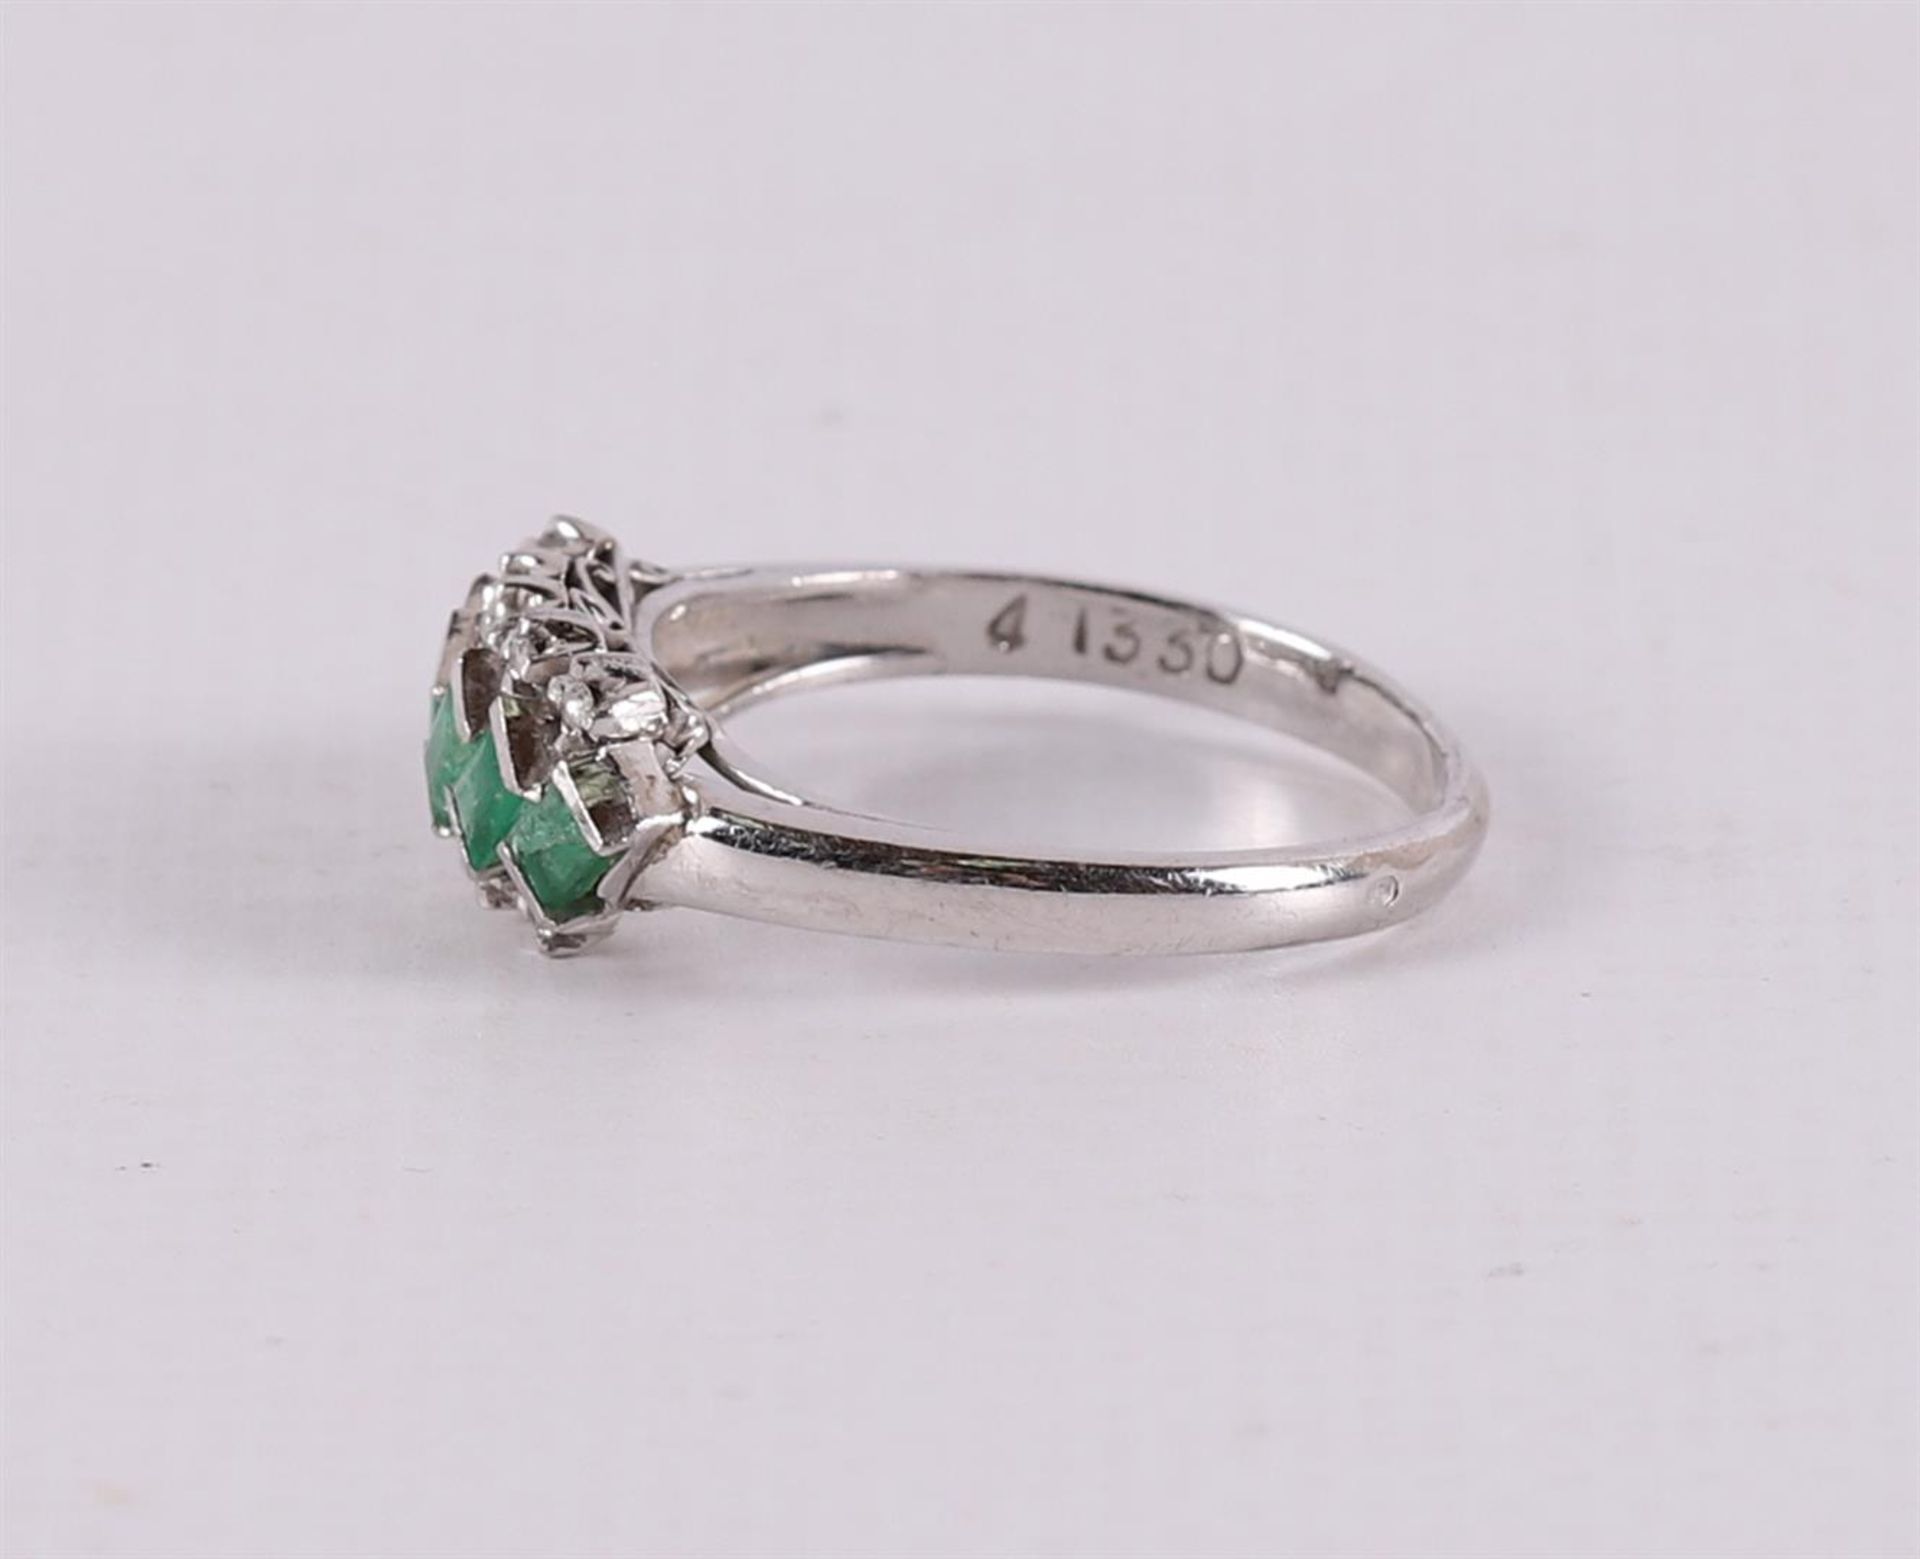 An 18 kt white gold Art Deco ring with 6 cut emeralds and 8 diamonds. - Image 2 of 2